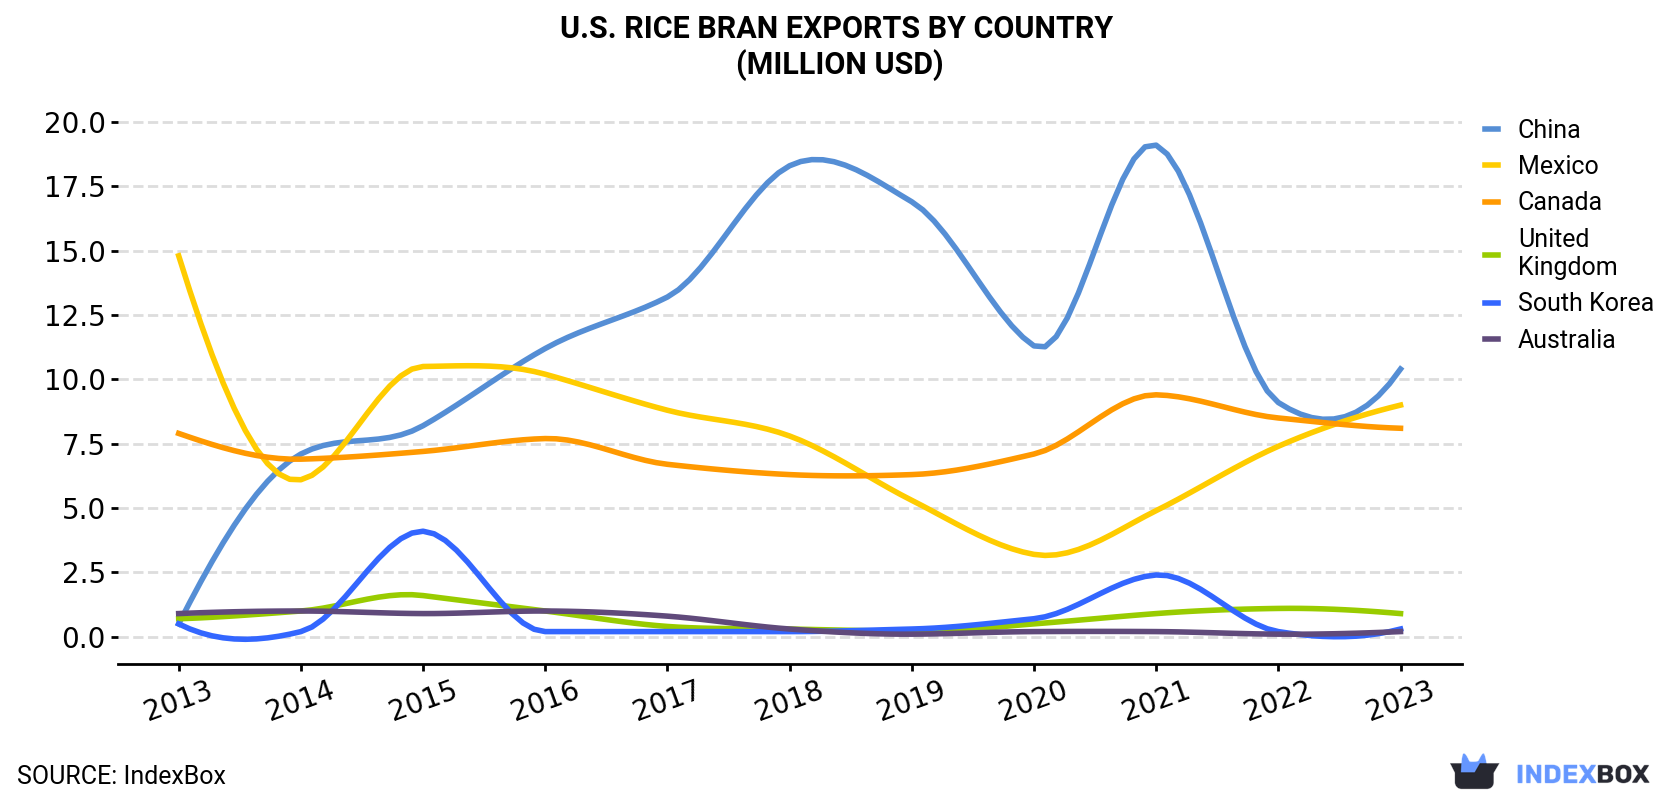 U.S. Rice Bran Exports By Country (Million USD)